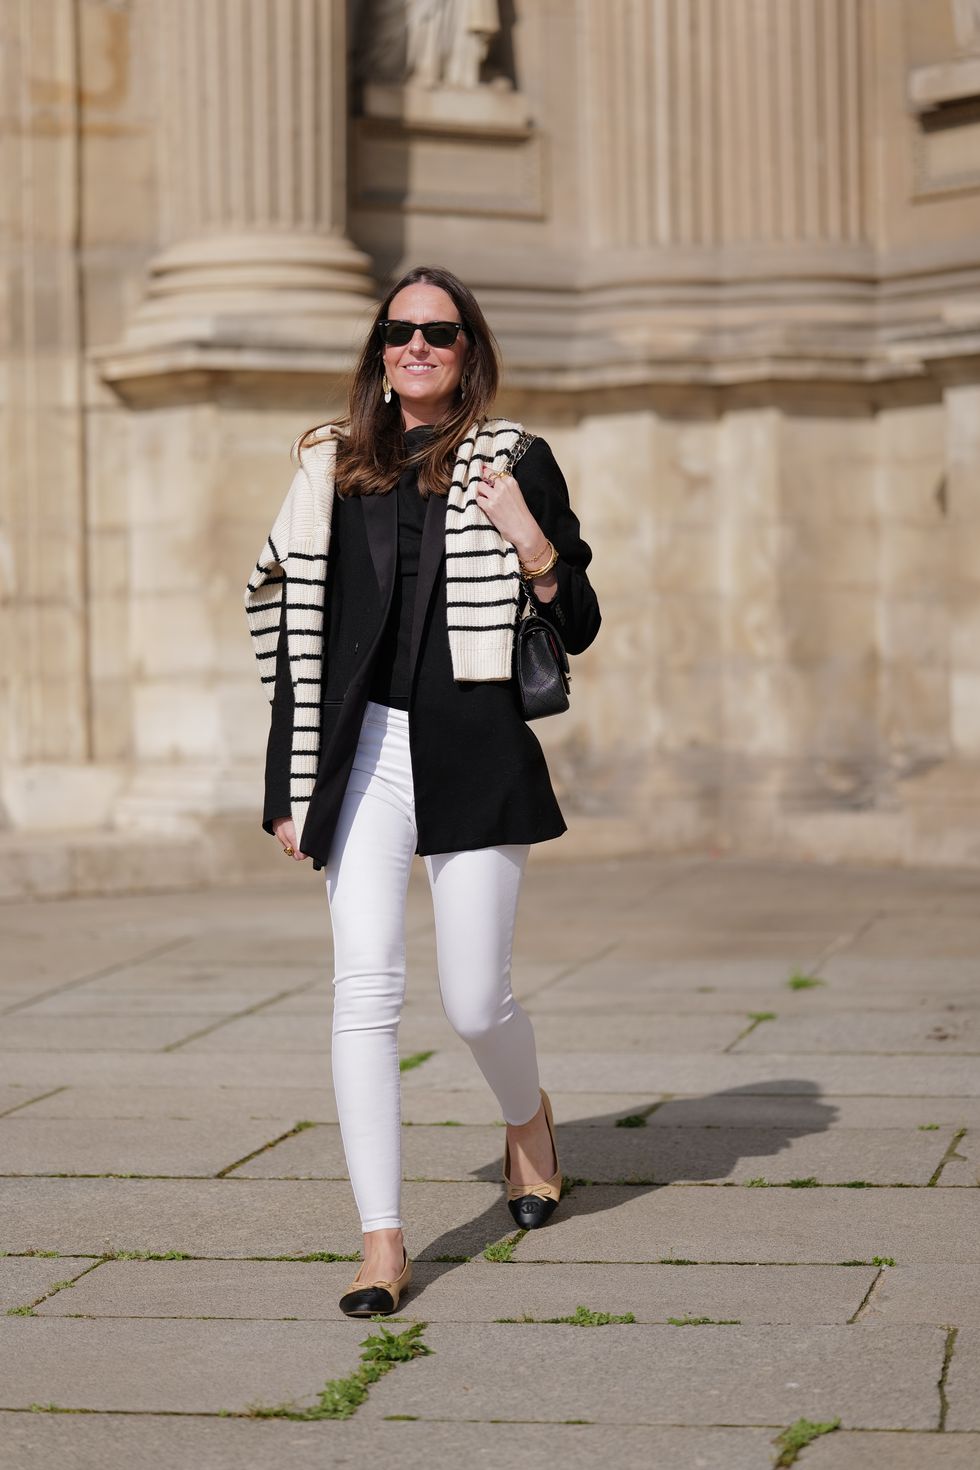 paris, france april 29 alba garavito torre wears black sunglasses from ray ban, gold and white pendant large earrings, a black t shirt, a white with black small striped print pattern wool pullover from massimo dutti, a black shiny grained leather timeless shoulder bag from chanel, a black oversized blazer jacket from munthe, white skinny denim pants from zara, beige shiny leather with black toe cap ballerinas from chanel , during a street style fashion photo session, on april 29, 2023 in paris, france photo by edward berthelotgetty images